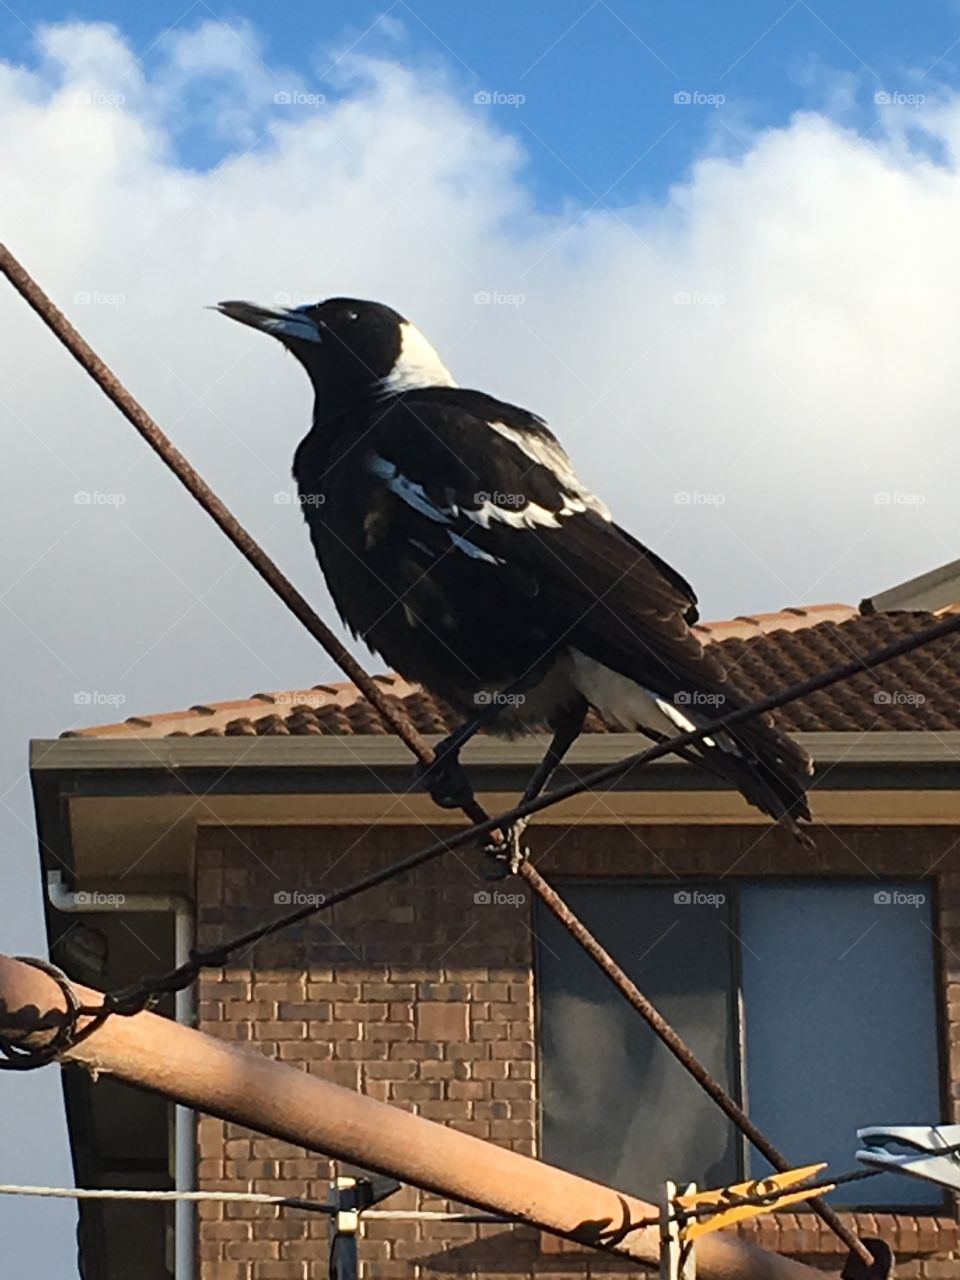 Magpie perching on outdoor clothes line, house roof and sky in background